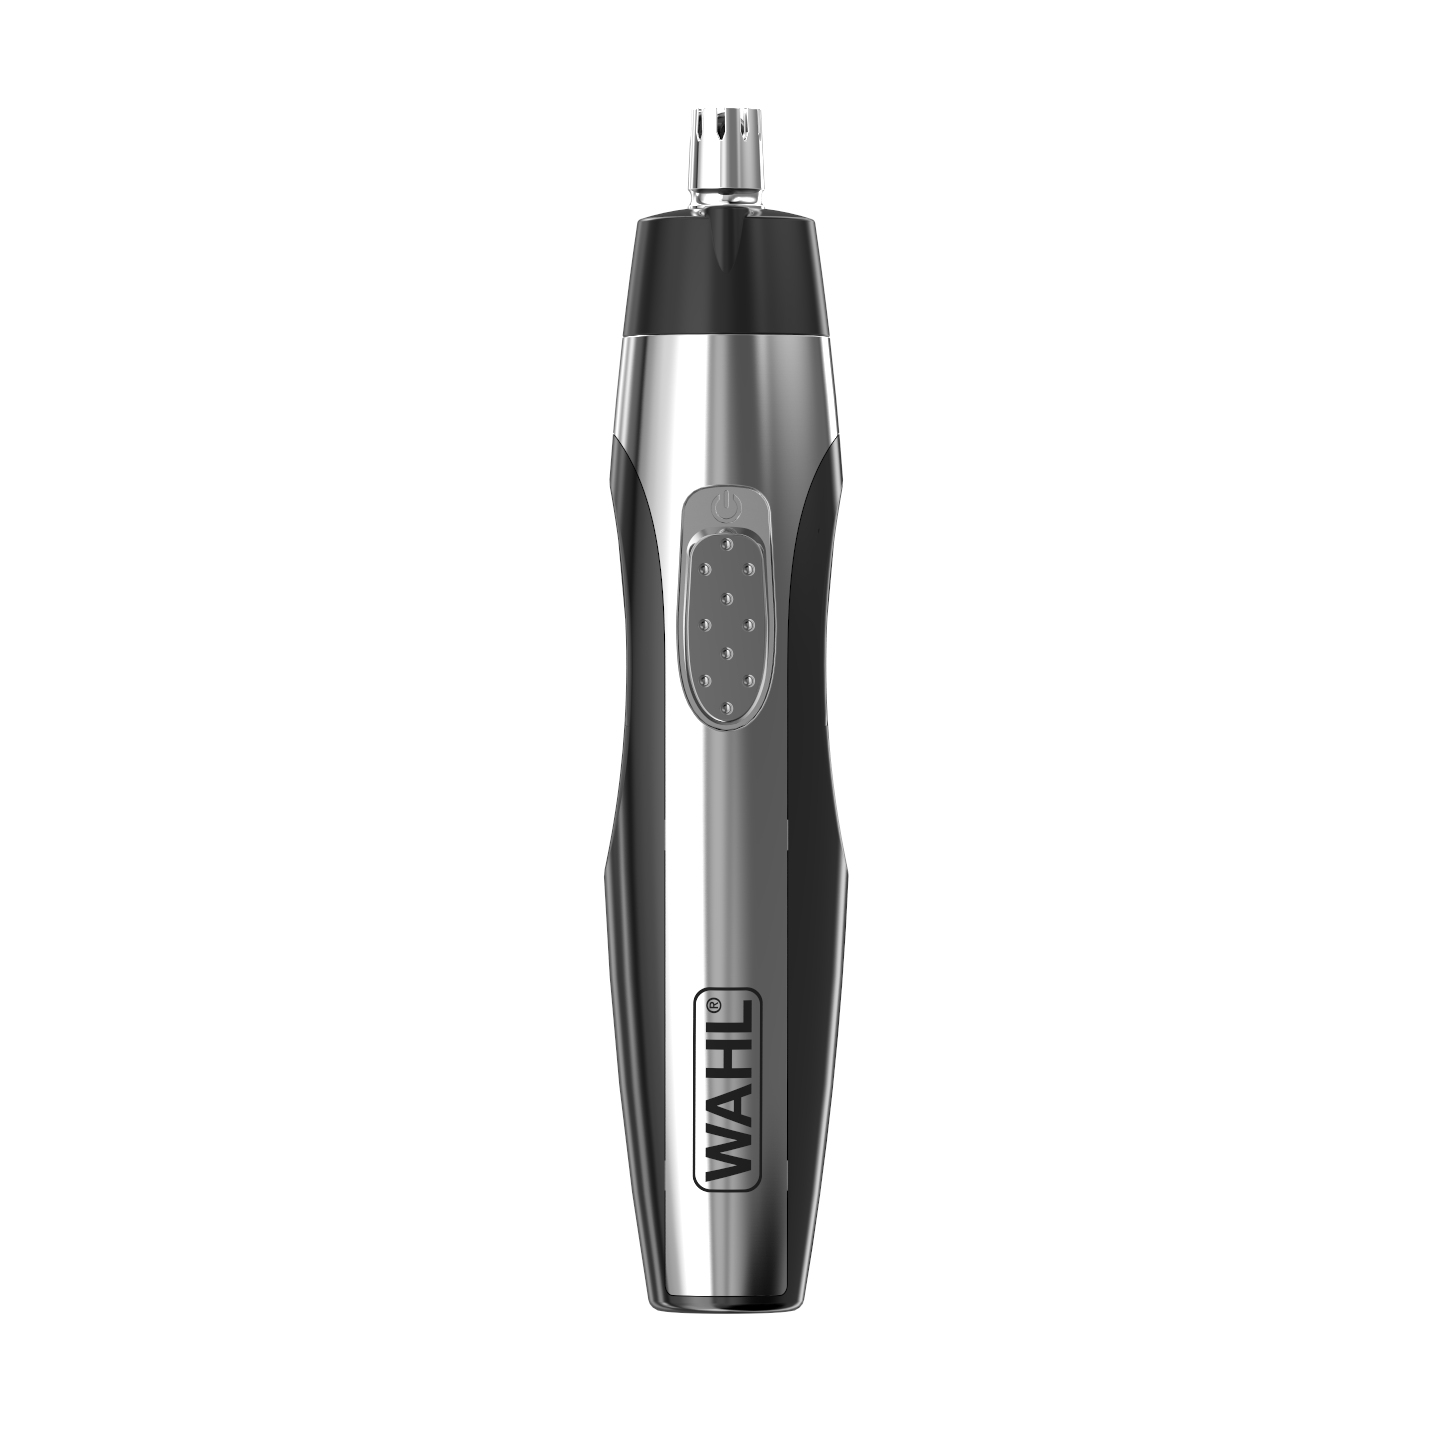 wahl brow trimmer